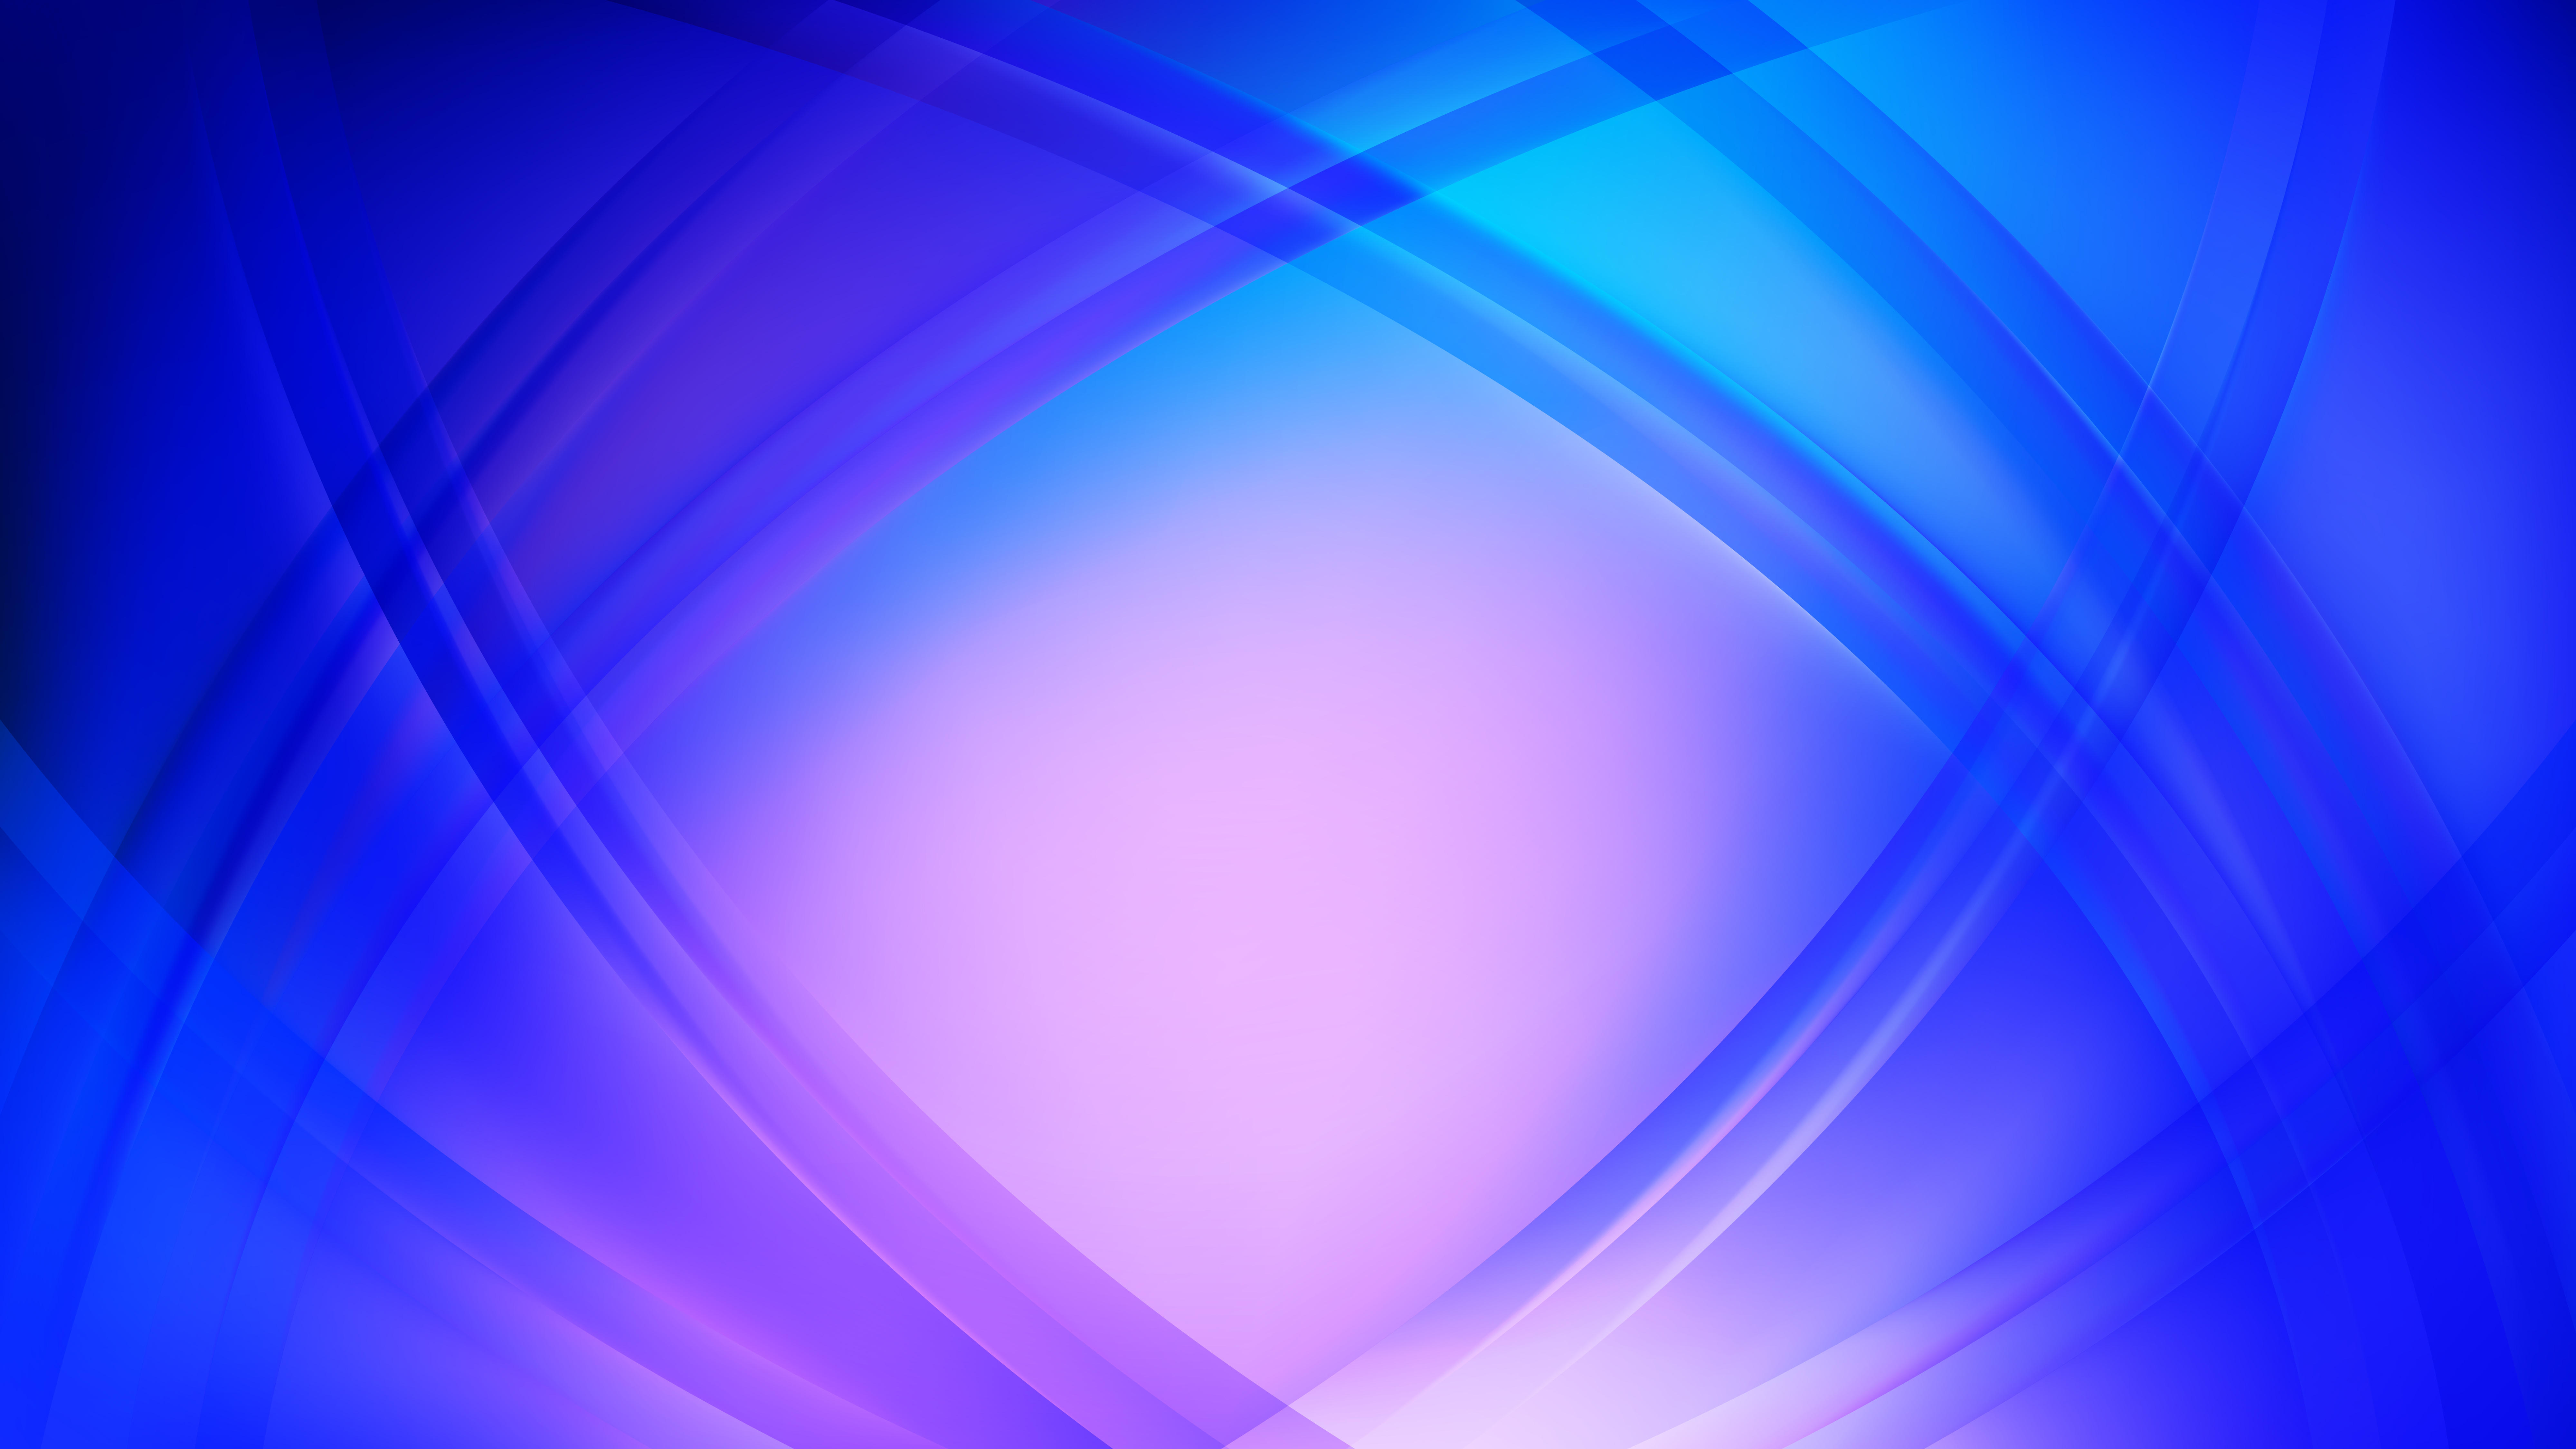 Abstract Blue And Purple Waves Curved Lines Background - Wavy Blue Wallpaper Hd Vector Stock New Curve - HD Wallpaper 